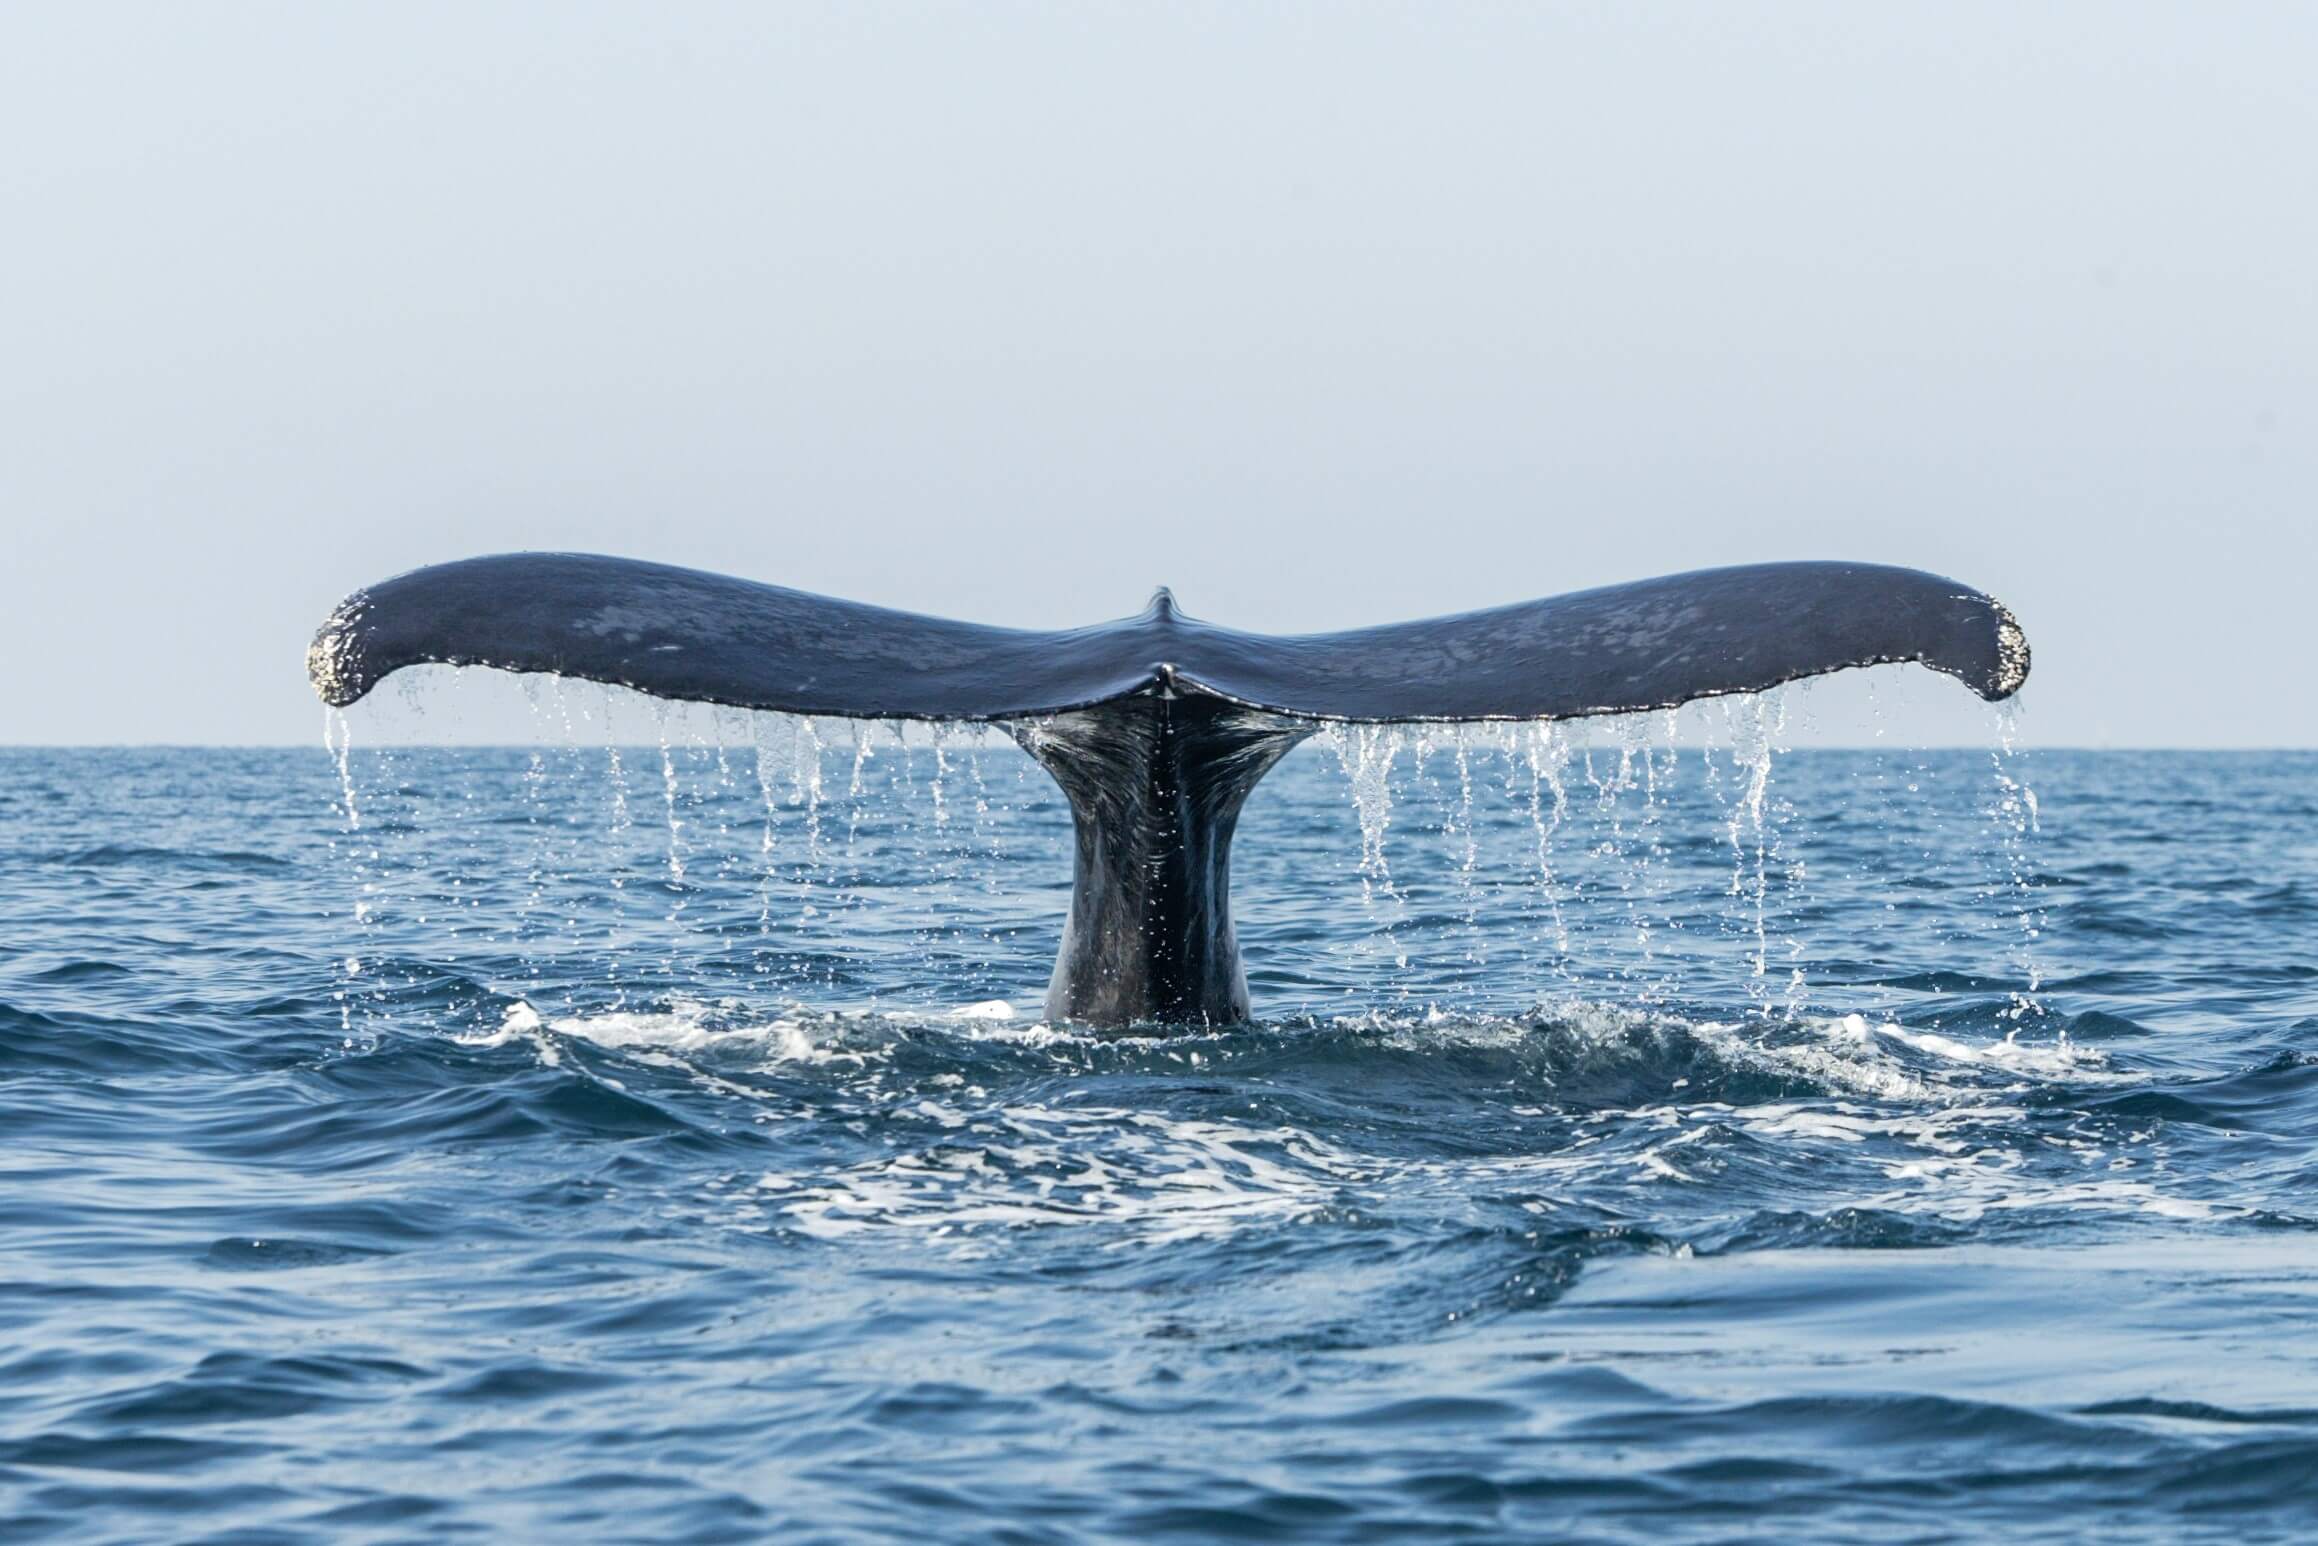 Whale watching is one of the Unique Things To Do In Puerto Vallarta.